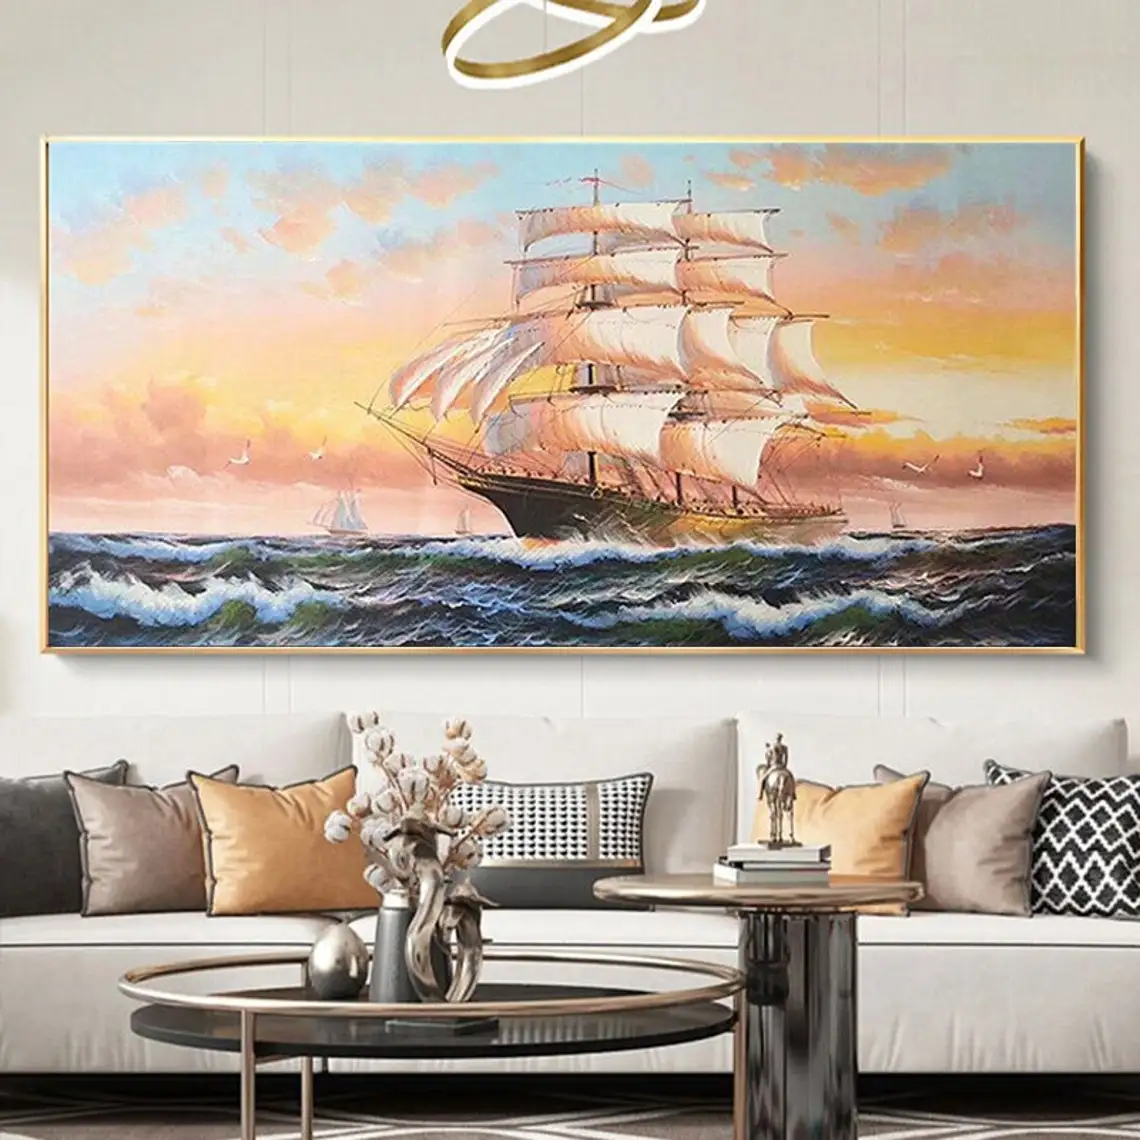 

Large Abstract Nautical Seascape Oil PaintinHand Painted Ocean Sailboat Landscape City Paintings Living Room Wall Art Home Decor